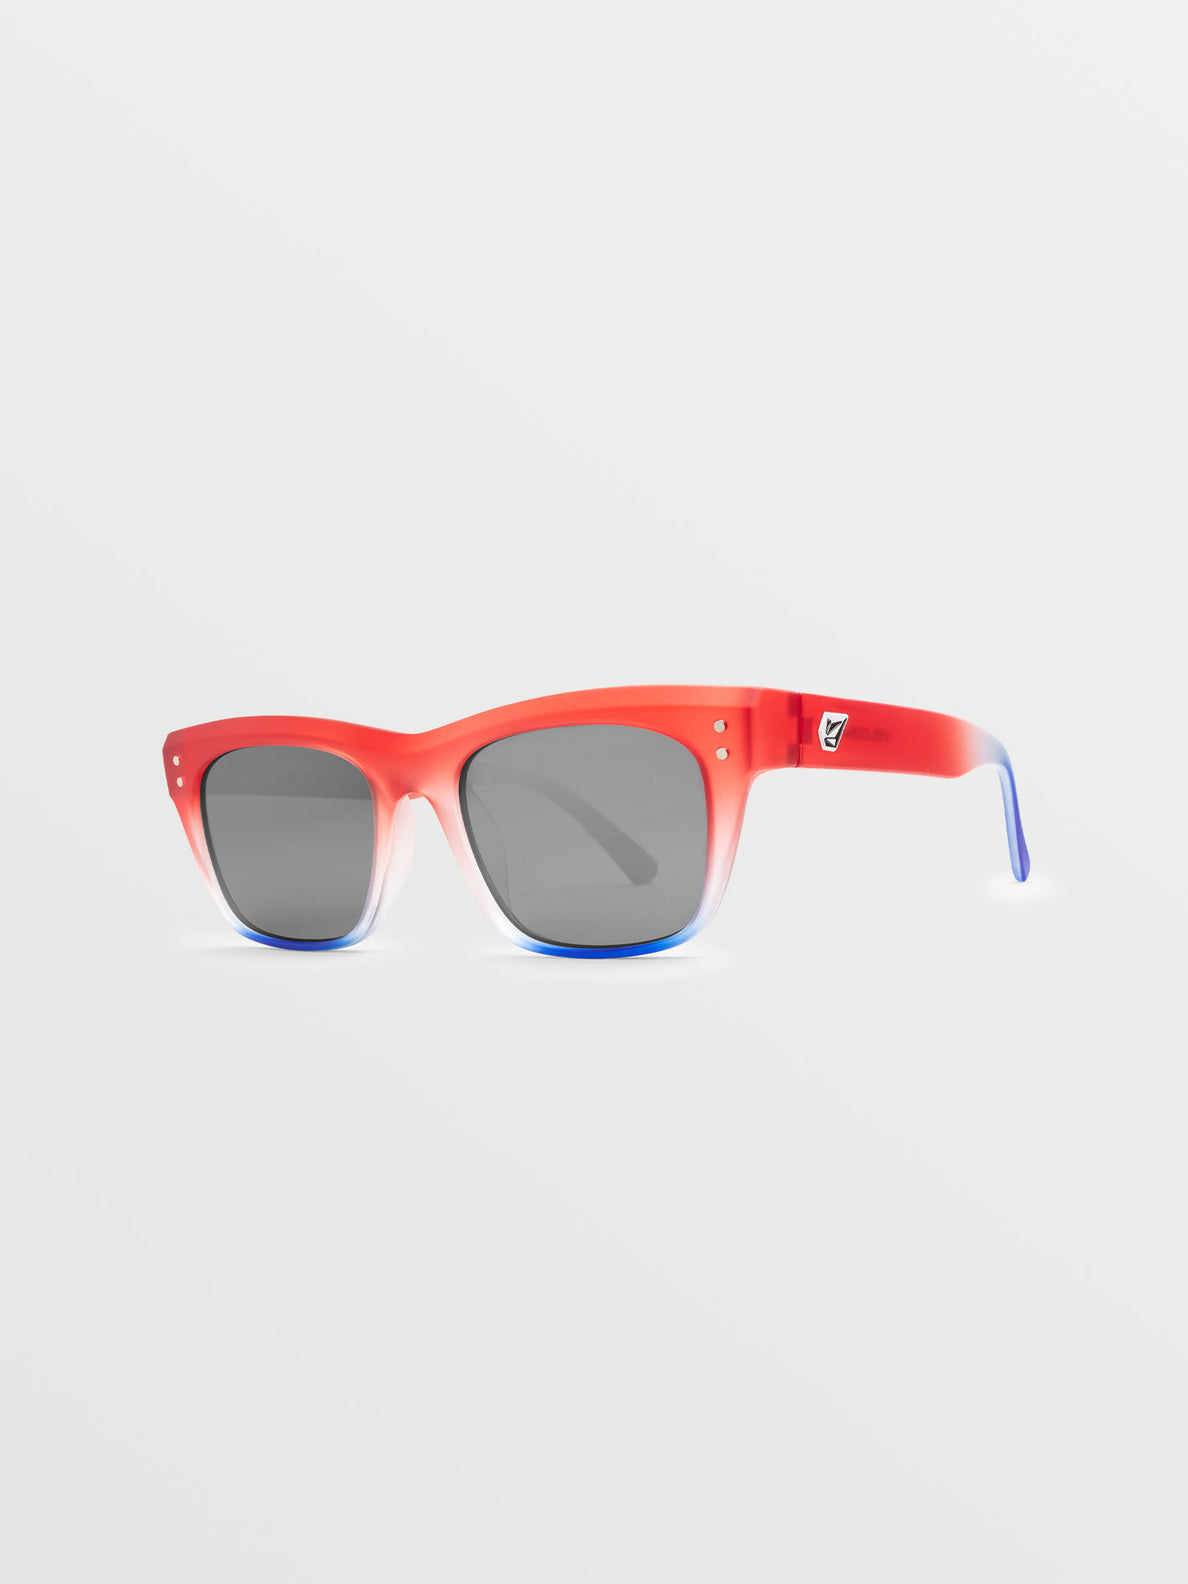 Stoneview Sunglasses - Stars & Stripes/Silver Mirror (VE04405318_STS) [B]